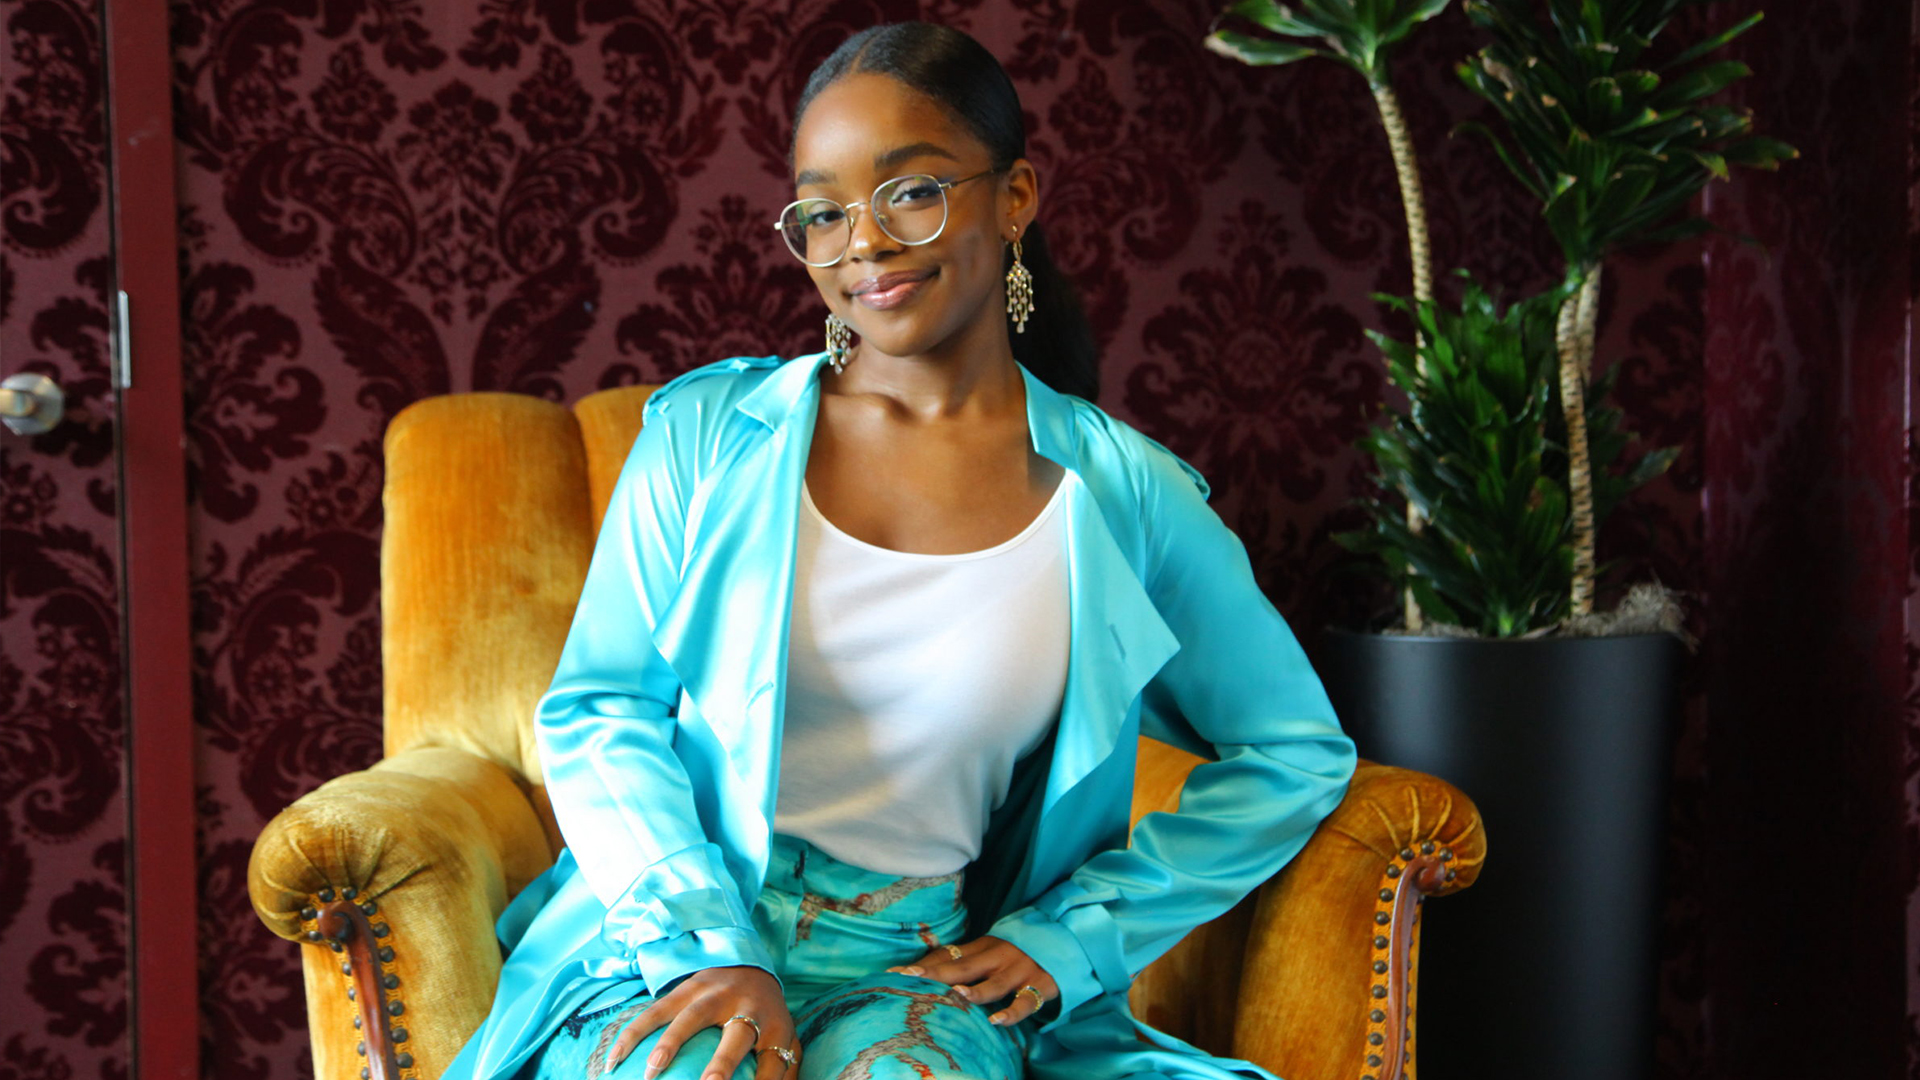 16-Year-Old Marsai Martin Launches Digital Series To Educate Her Generation On Financial Literacy